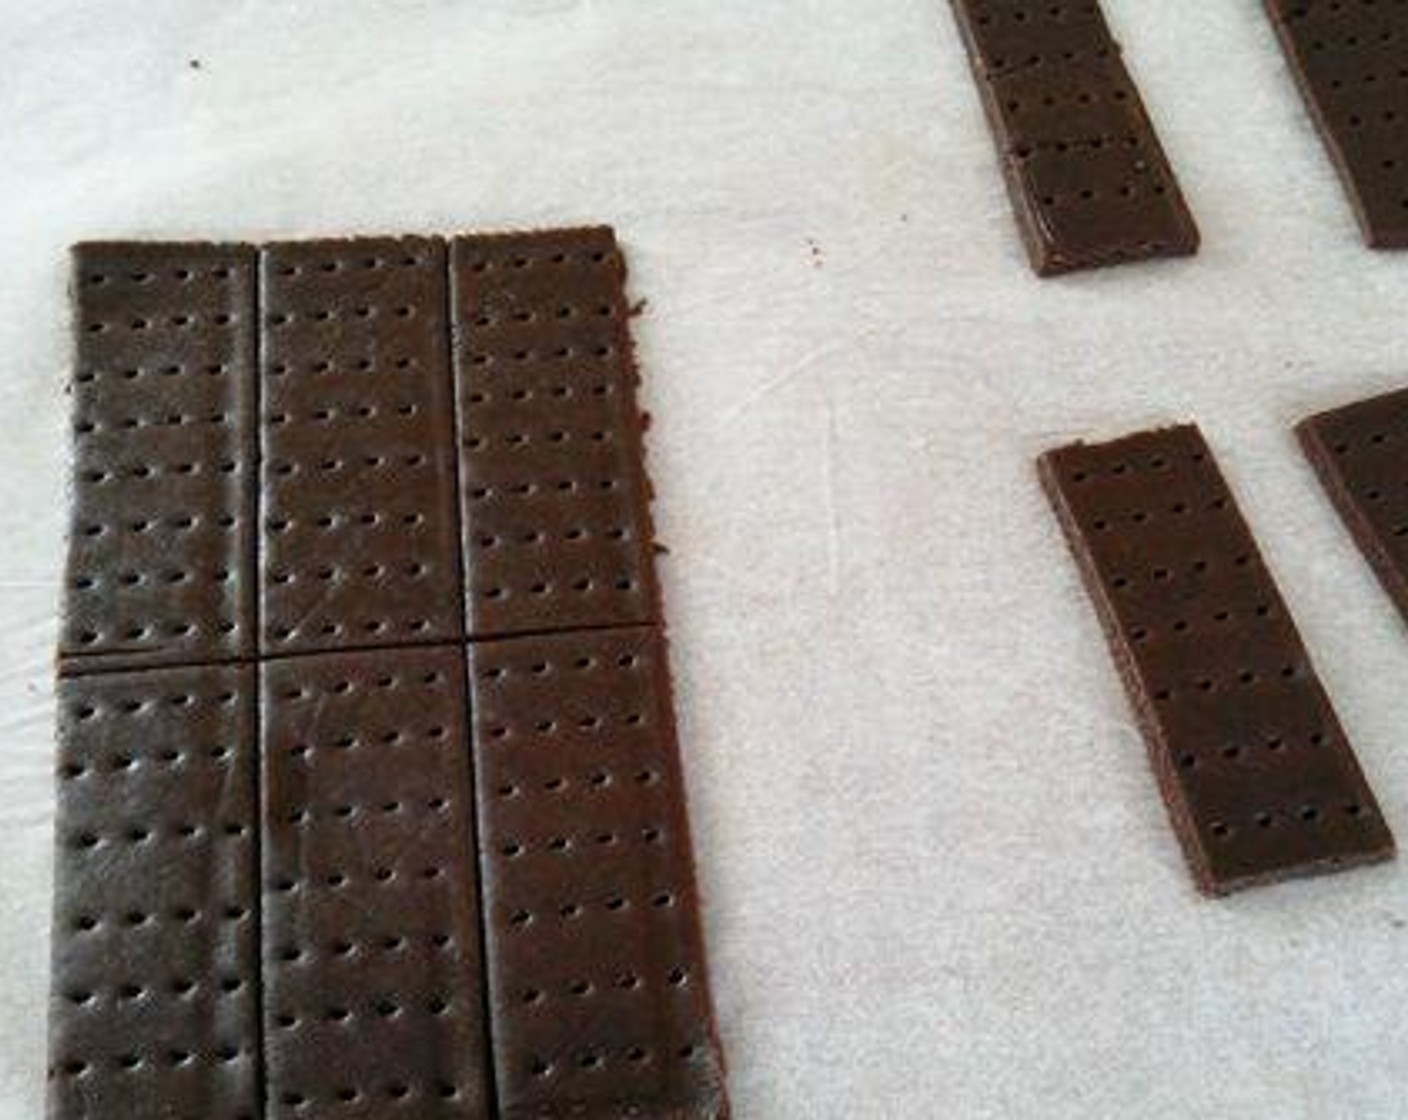 step 6 Using a cookie cutter or knife cut rectangular shaped cookies out of it. Using a fork prick on the rectangle shaped cookie dough. This is done to give it a bourbon biscuit effect. Bake in a preheated oven for 12 to 15 minutes. Once done take it out of the oven and let it cool well.